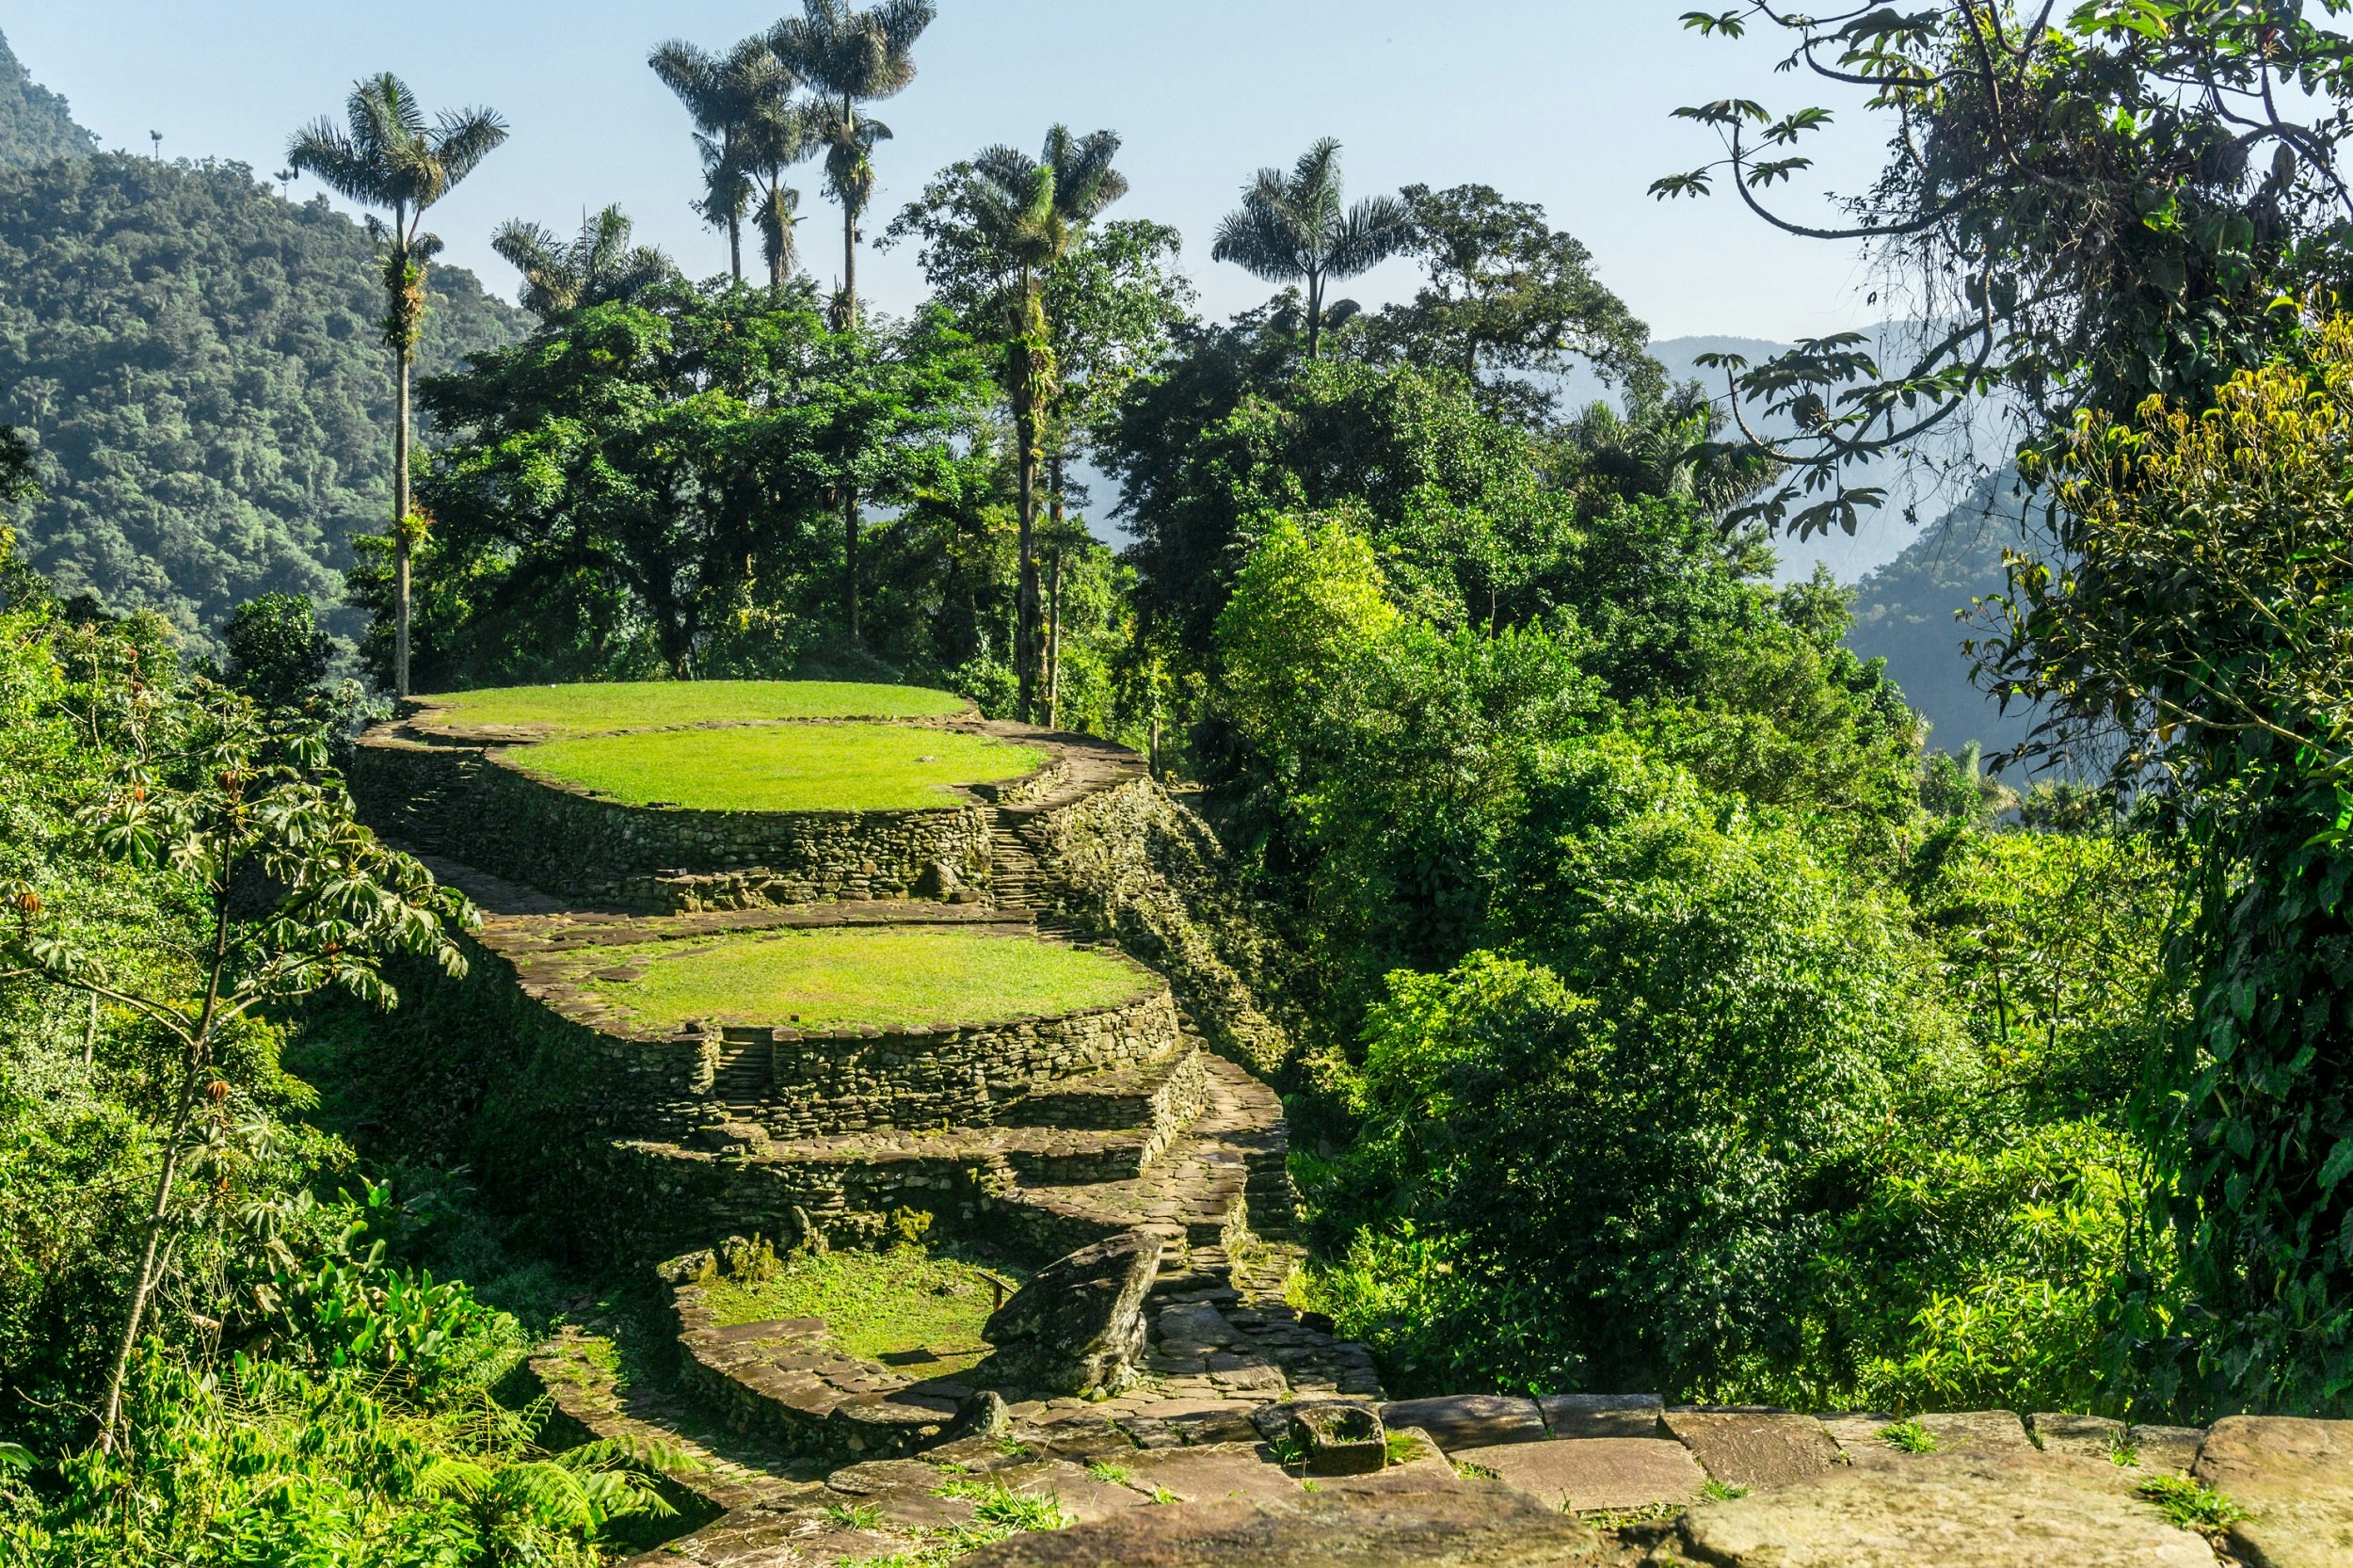 Set within a jungle atop a mountain are several terraced grass fields from an ancient city.